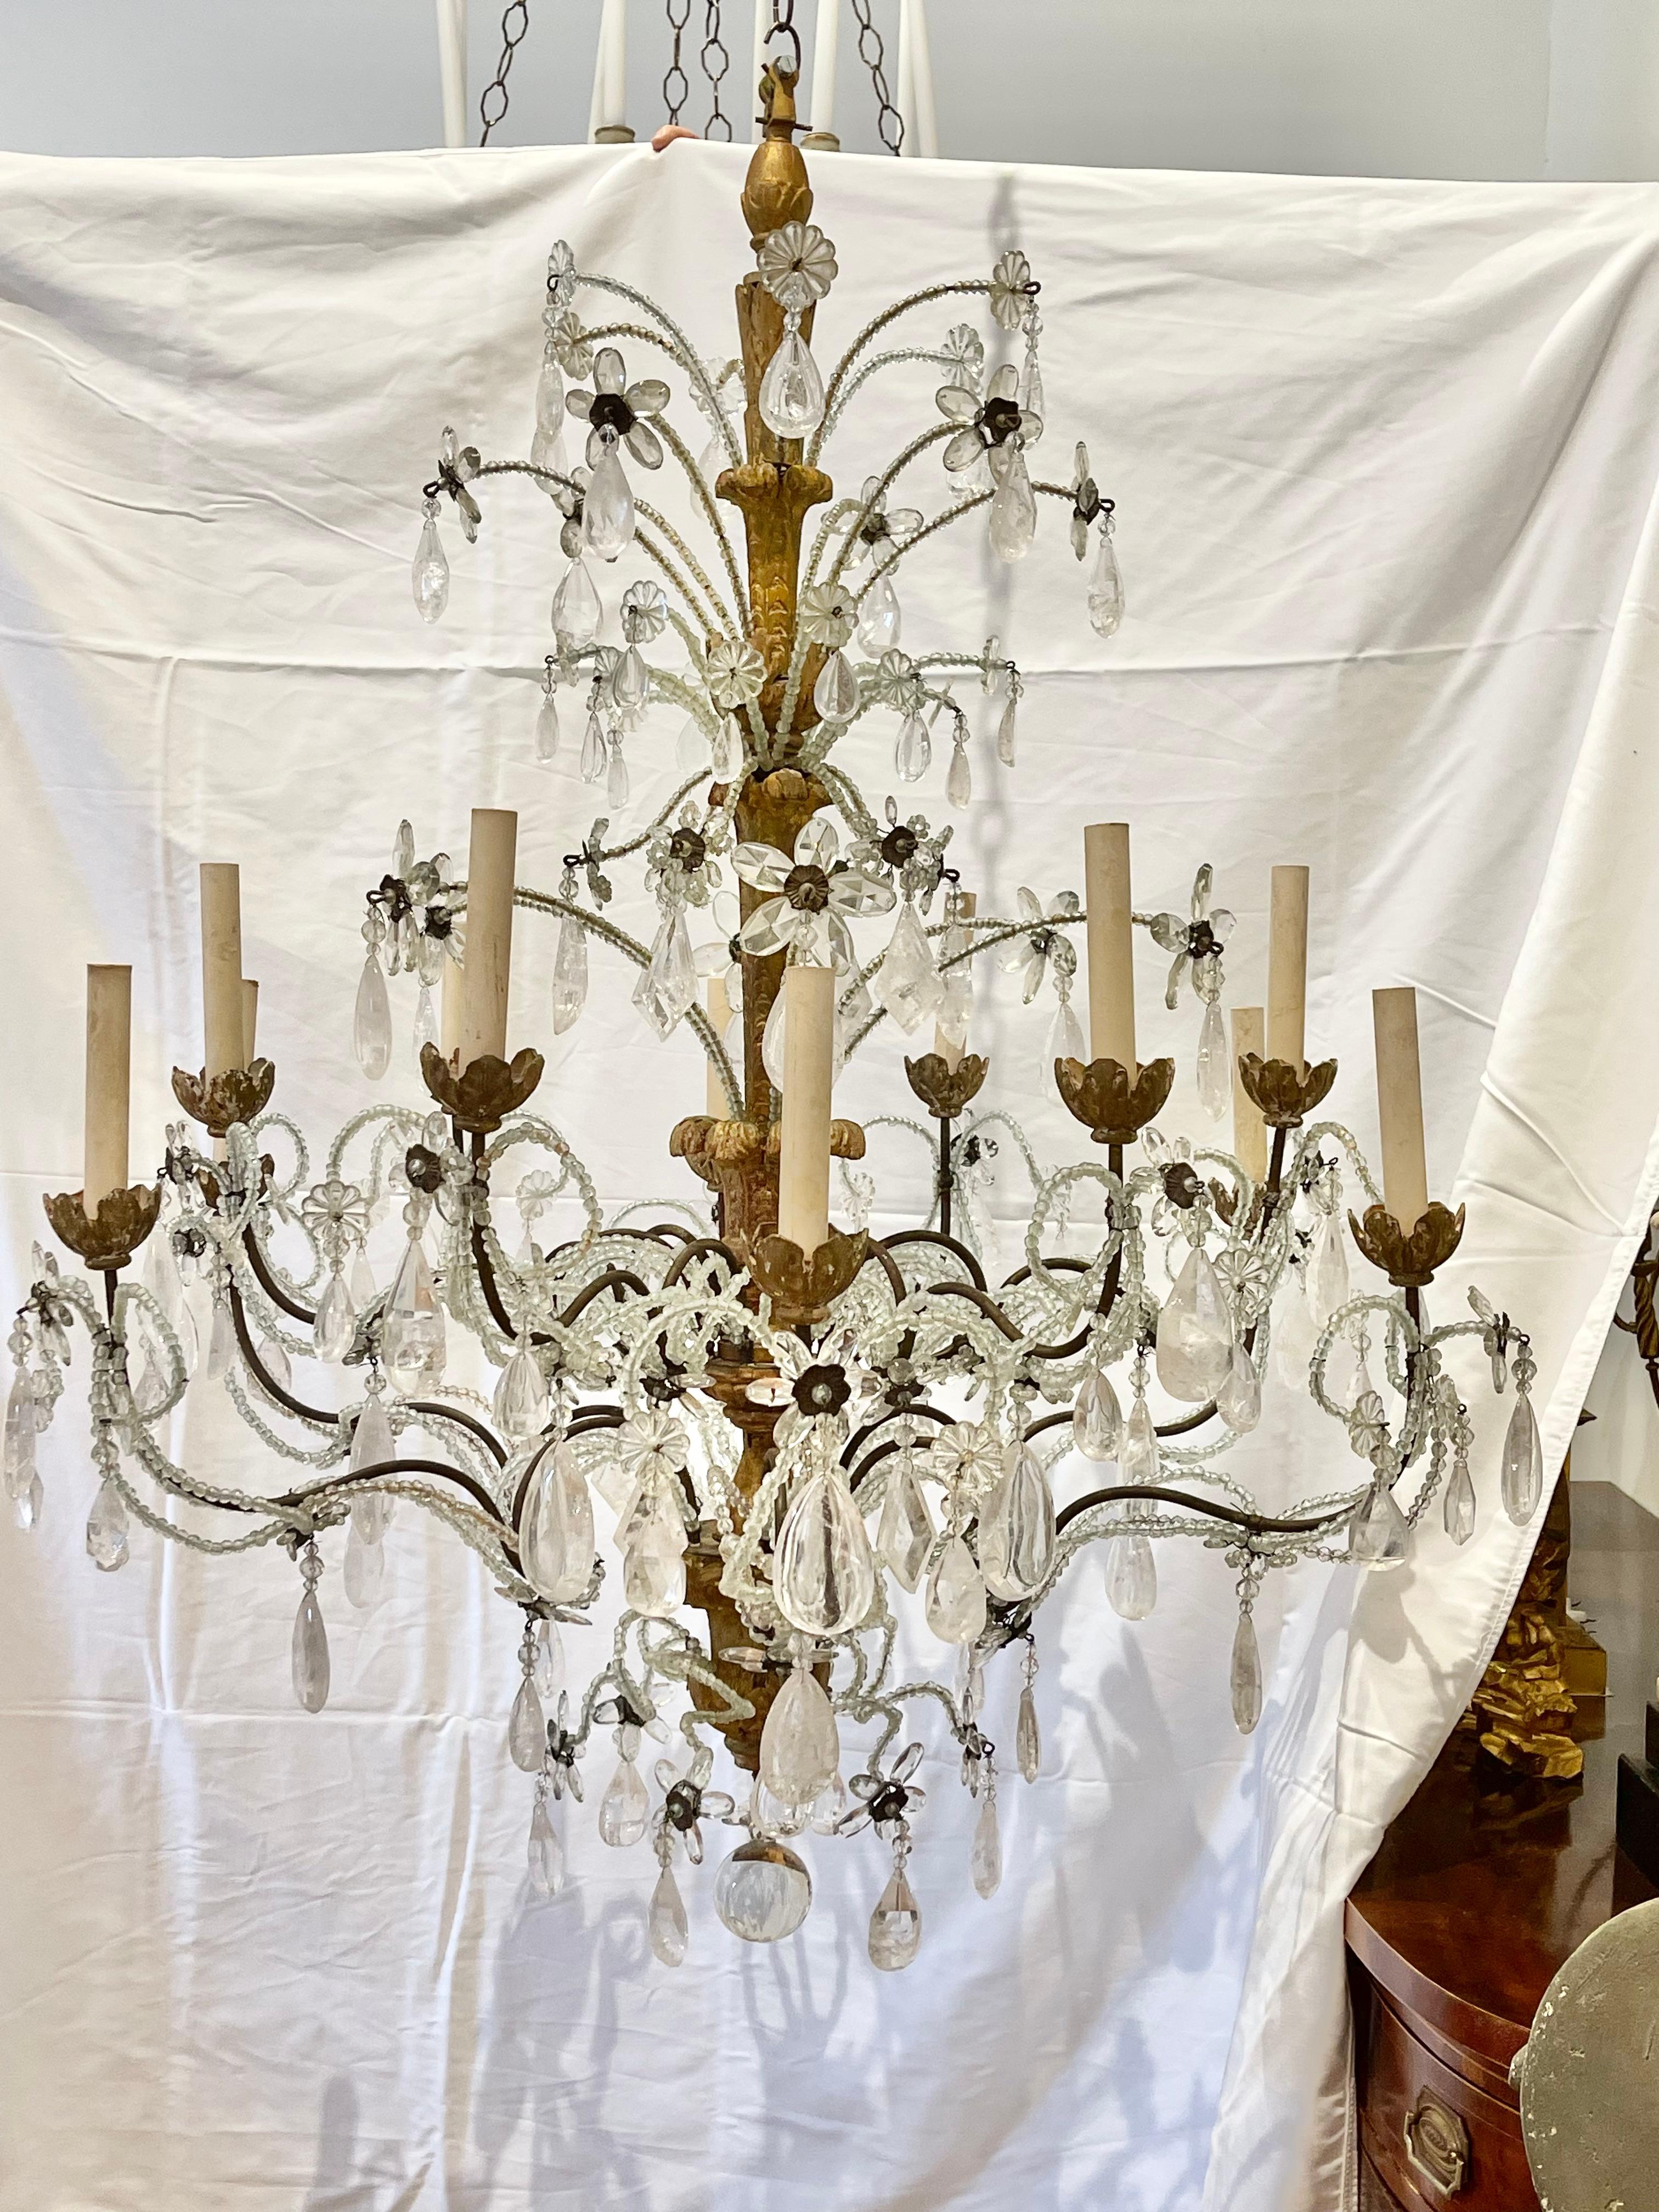 A north Italian giltwood, gilt-metal, cut-glass and rock crystal twelve-light chandelier
Genoa, 18th century
The central foliate-carved baluster shaft issuing sprays of beaded and faceted flowers and twelve scrolling candlearms lined with beads